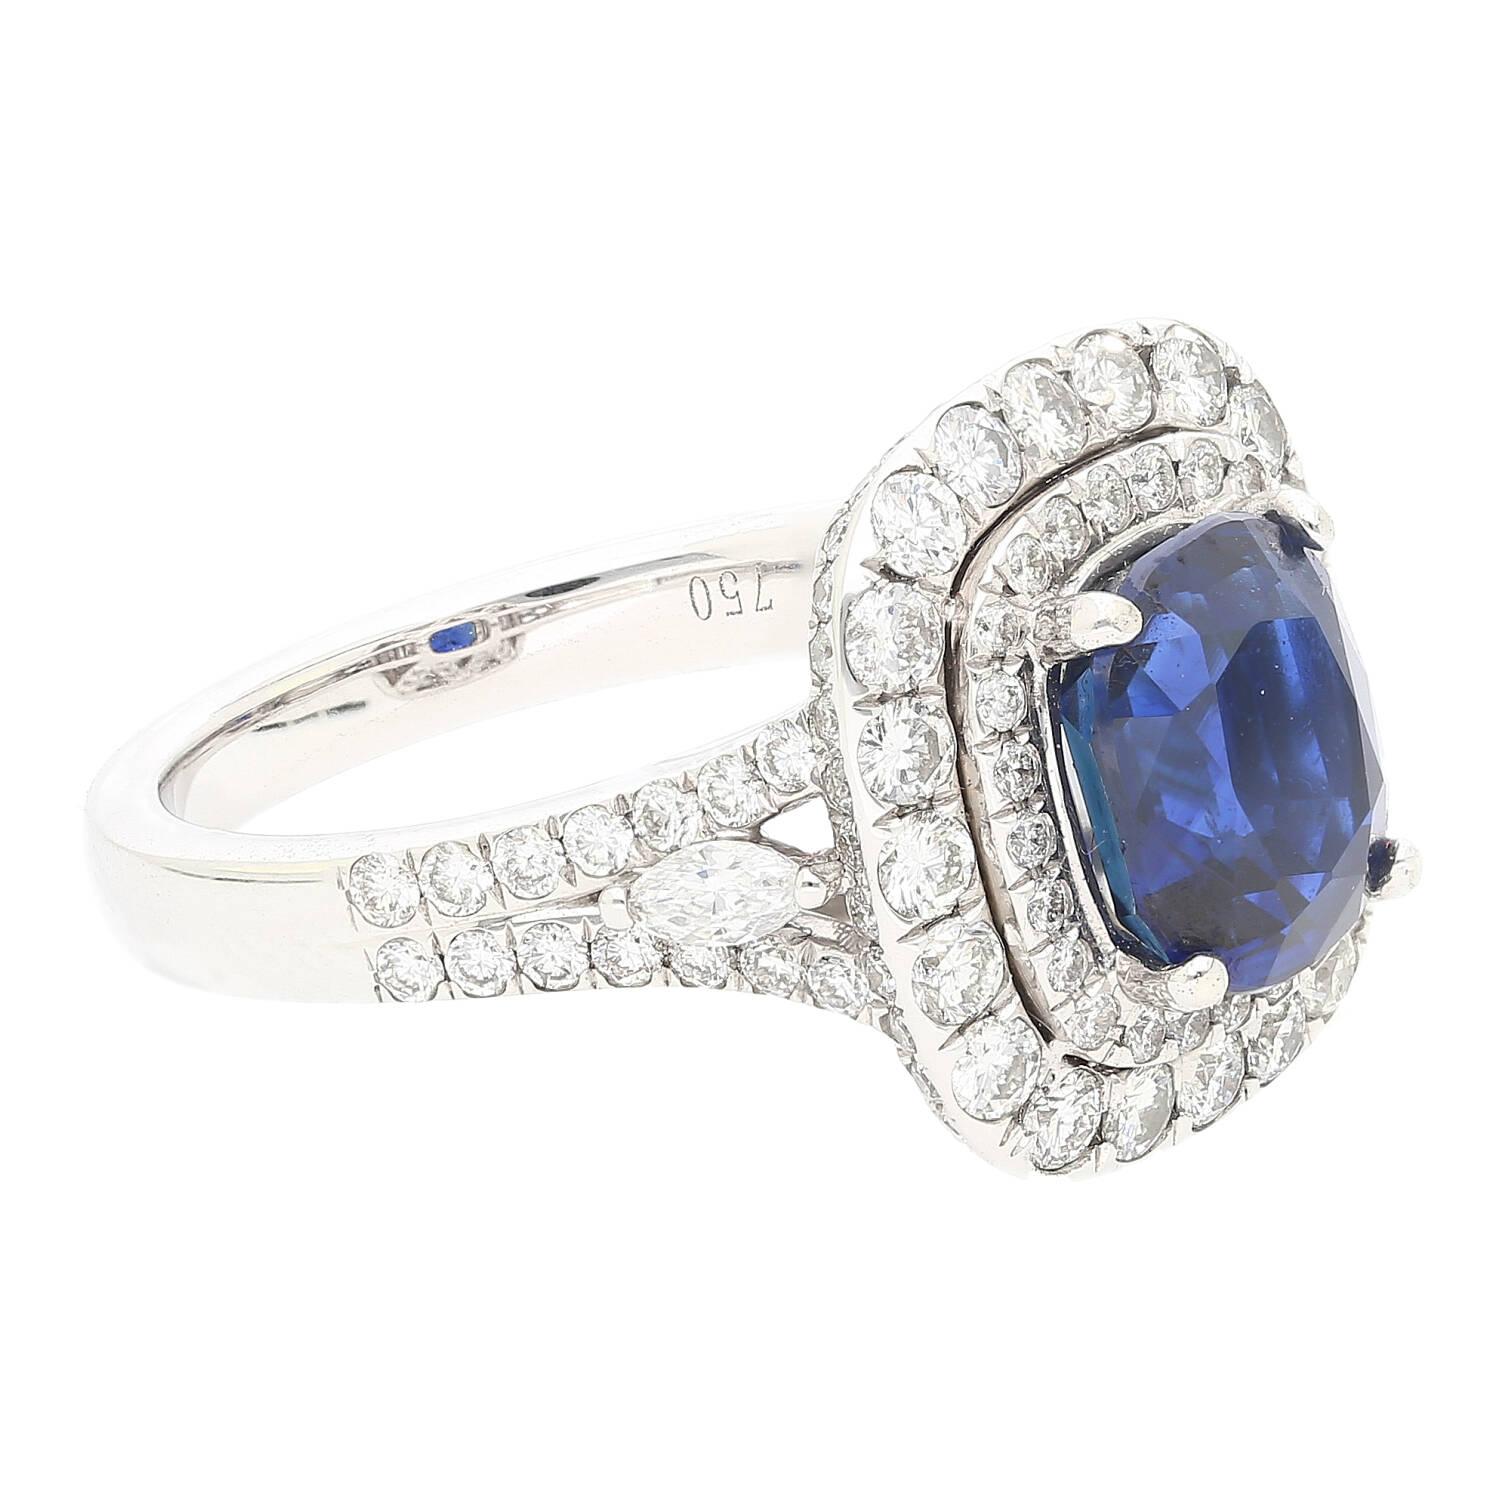 GIA certified 3.12 carat cushion-cut unheated blue sapphire and round cut double diamond halo in 18k white gold. 

Every gemstone is natural, mined, and untreated with any color or clarity enhancements. The diamonds are eye-clean and superbly white.